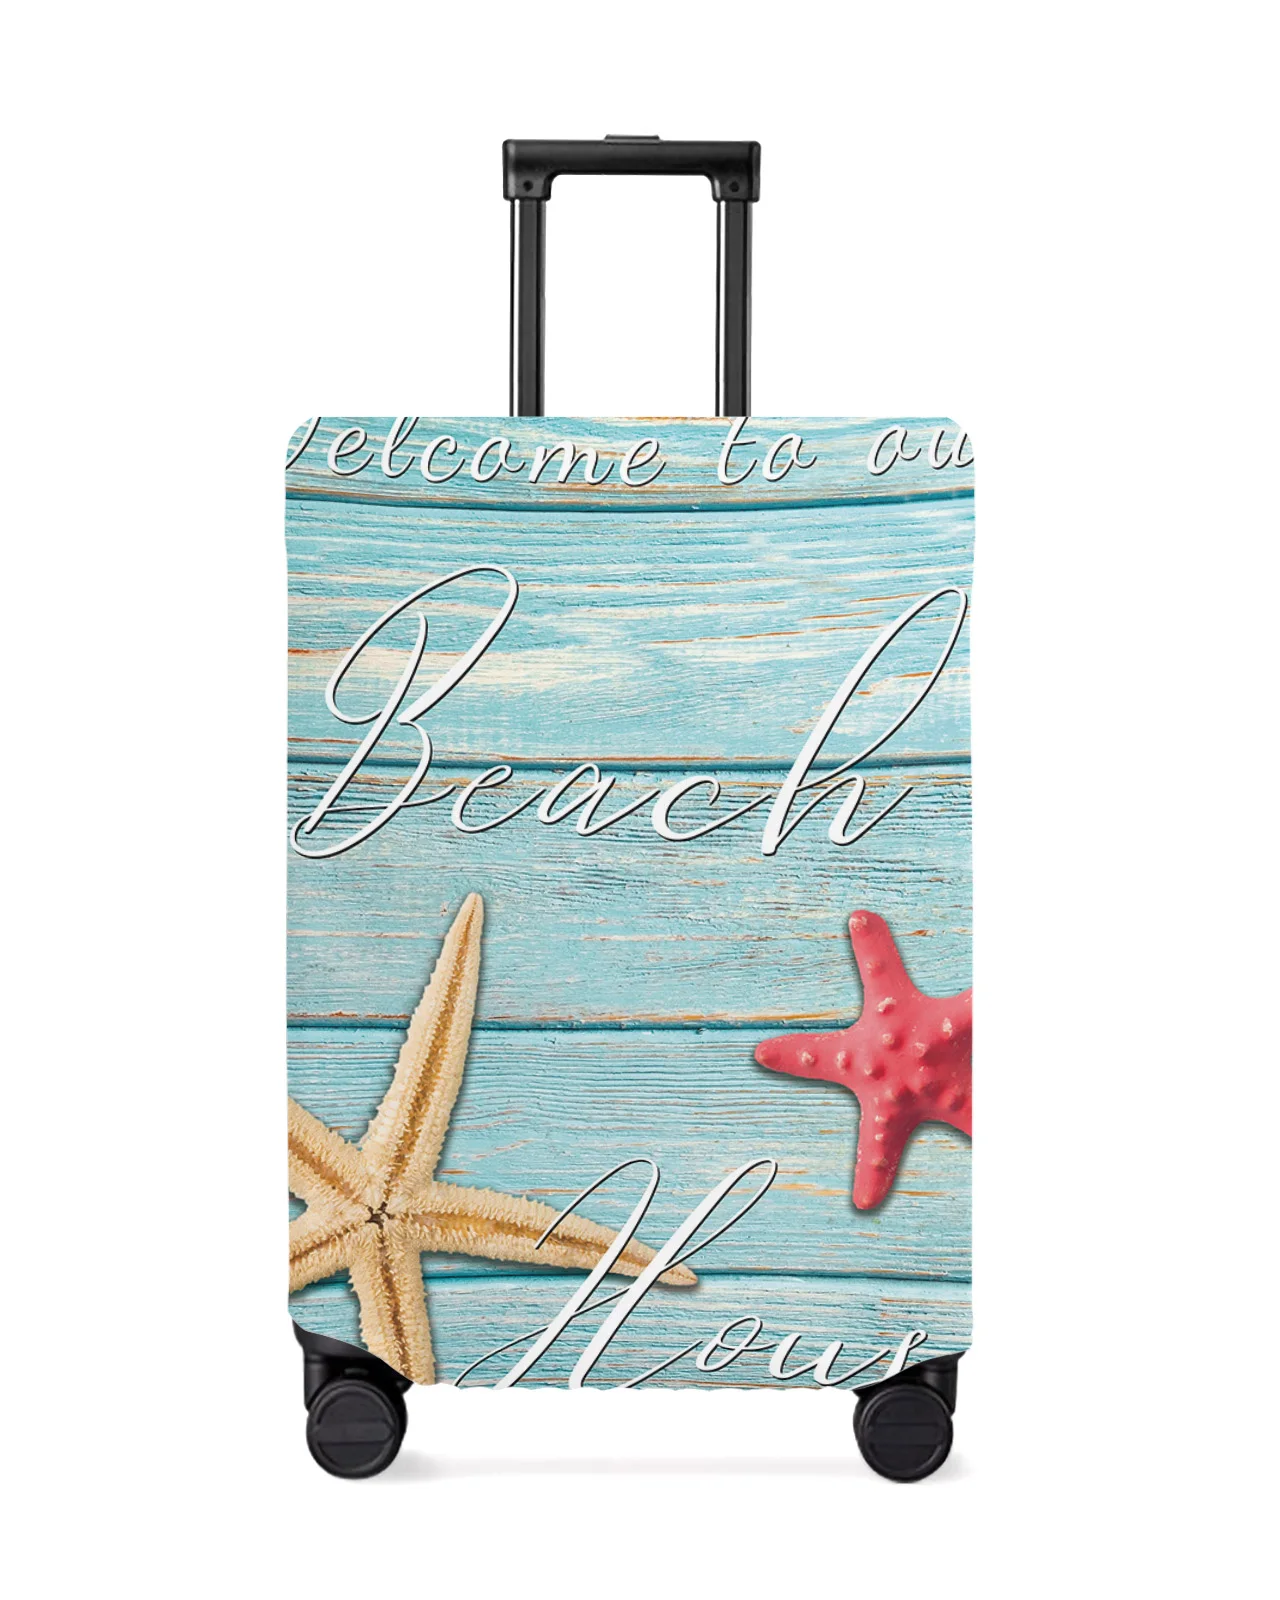 

Wood Grain Beach Text Starfish Travel Luggage Cover Elastic Baggage Cover Suitcase Case Dust Cover Travel Accessories